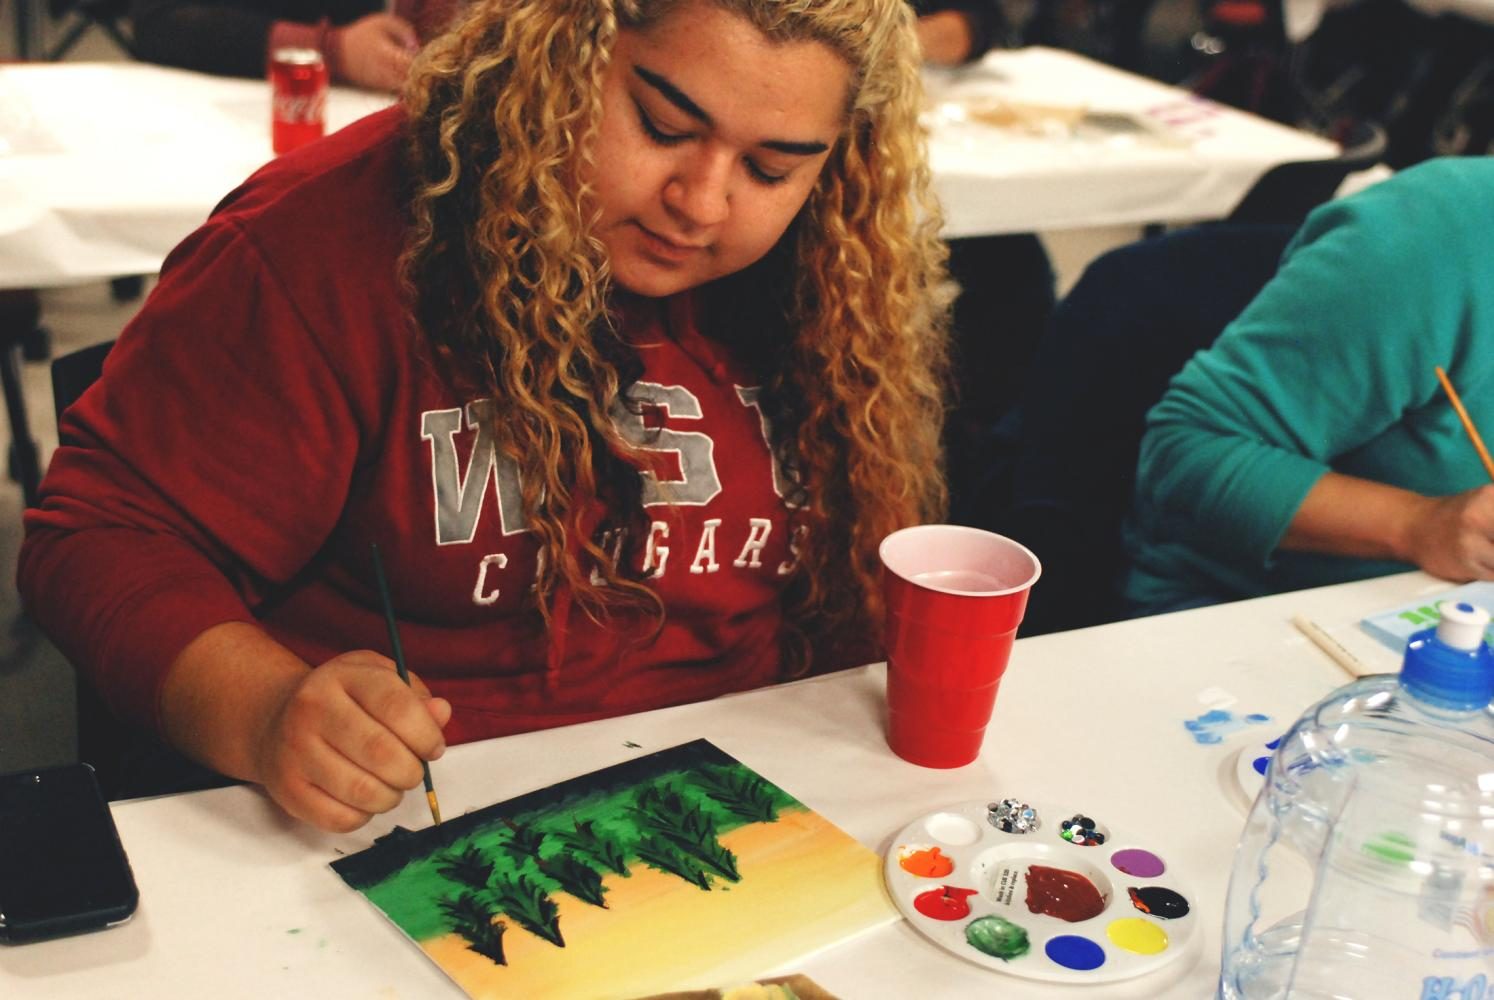 Student Gabby Oliva concentrates on painting a landscape at the WSU Student Entertainment Board Arts Hour event last night. SEB arranged two Arts Hours for students, with the goal of allowing them to express themselves creatively in a positive, encouraging environment.